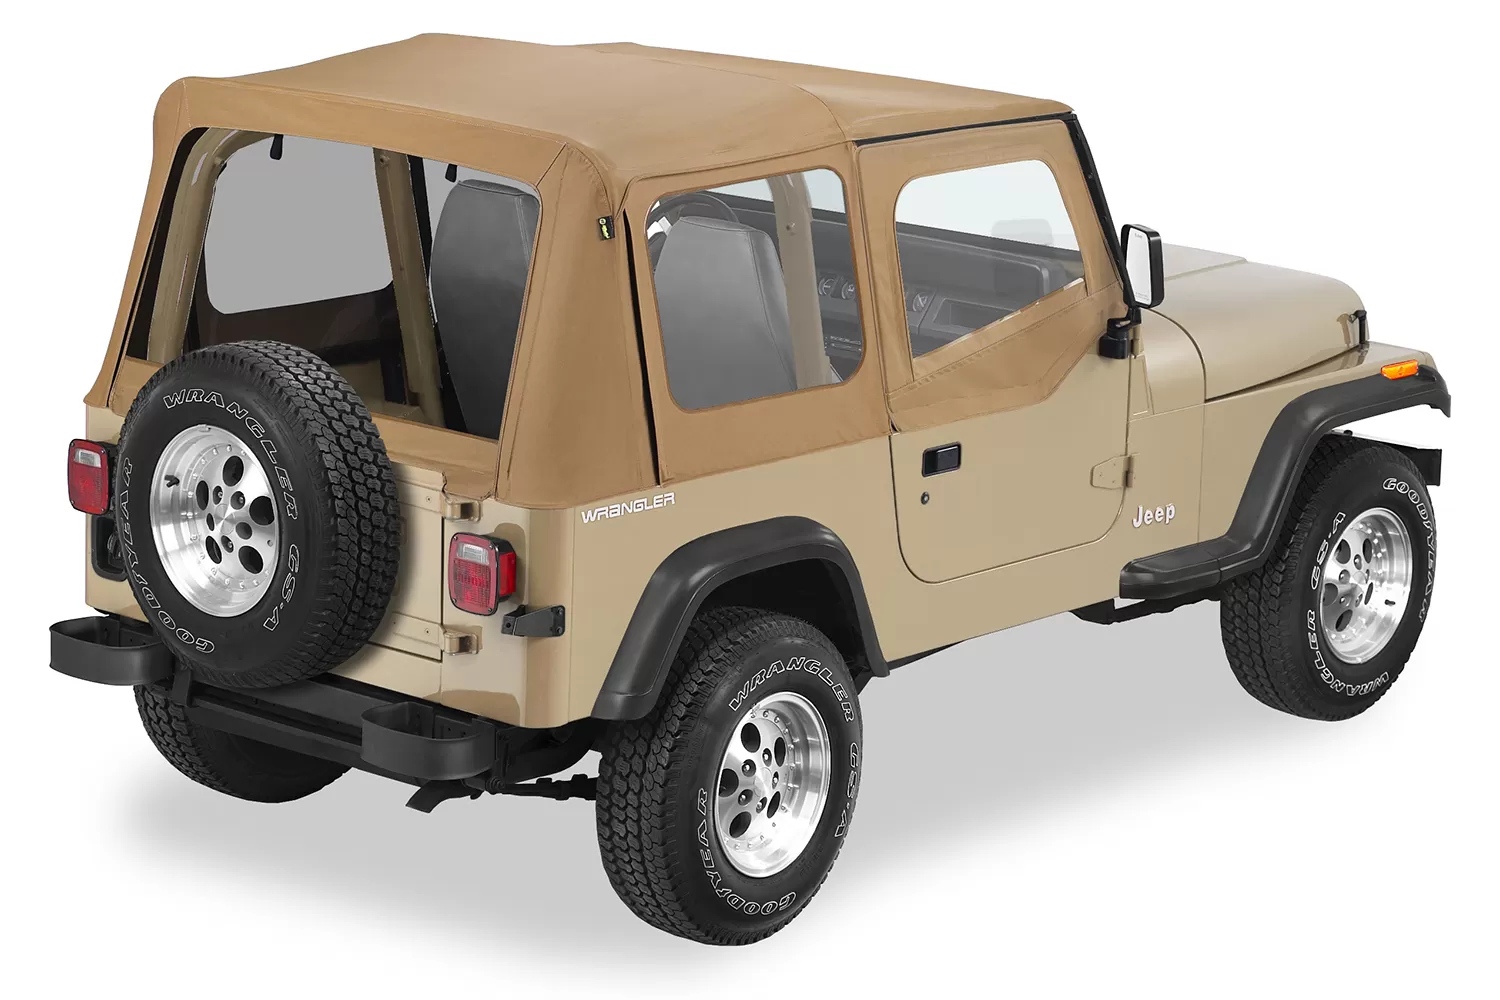 Bestop Spice Sailcloth Replace-a-Top Clear Windows w/ Upper Door Skins Jeep Wrangler 1988-1995 - 79120-37